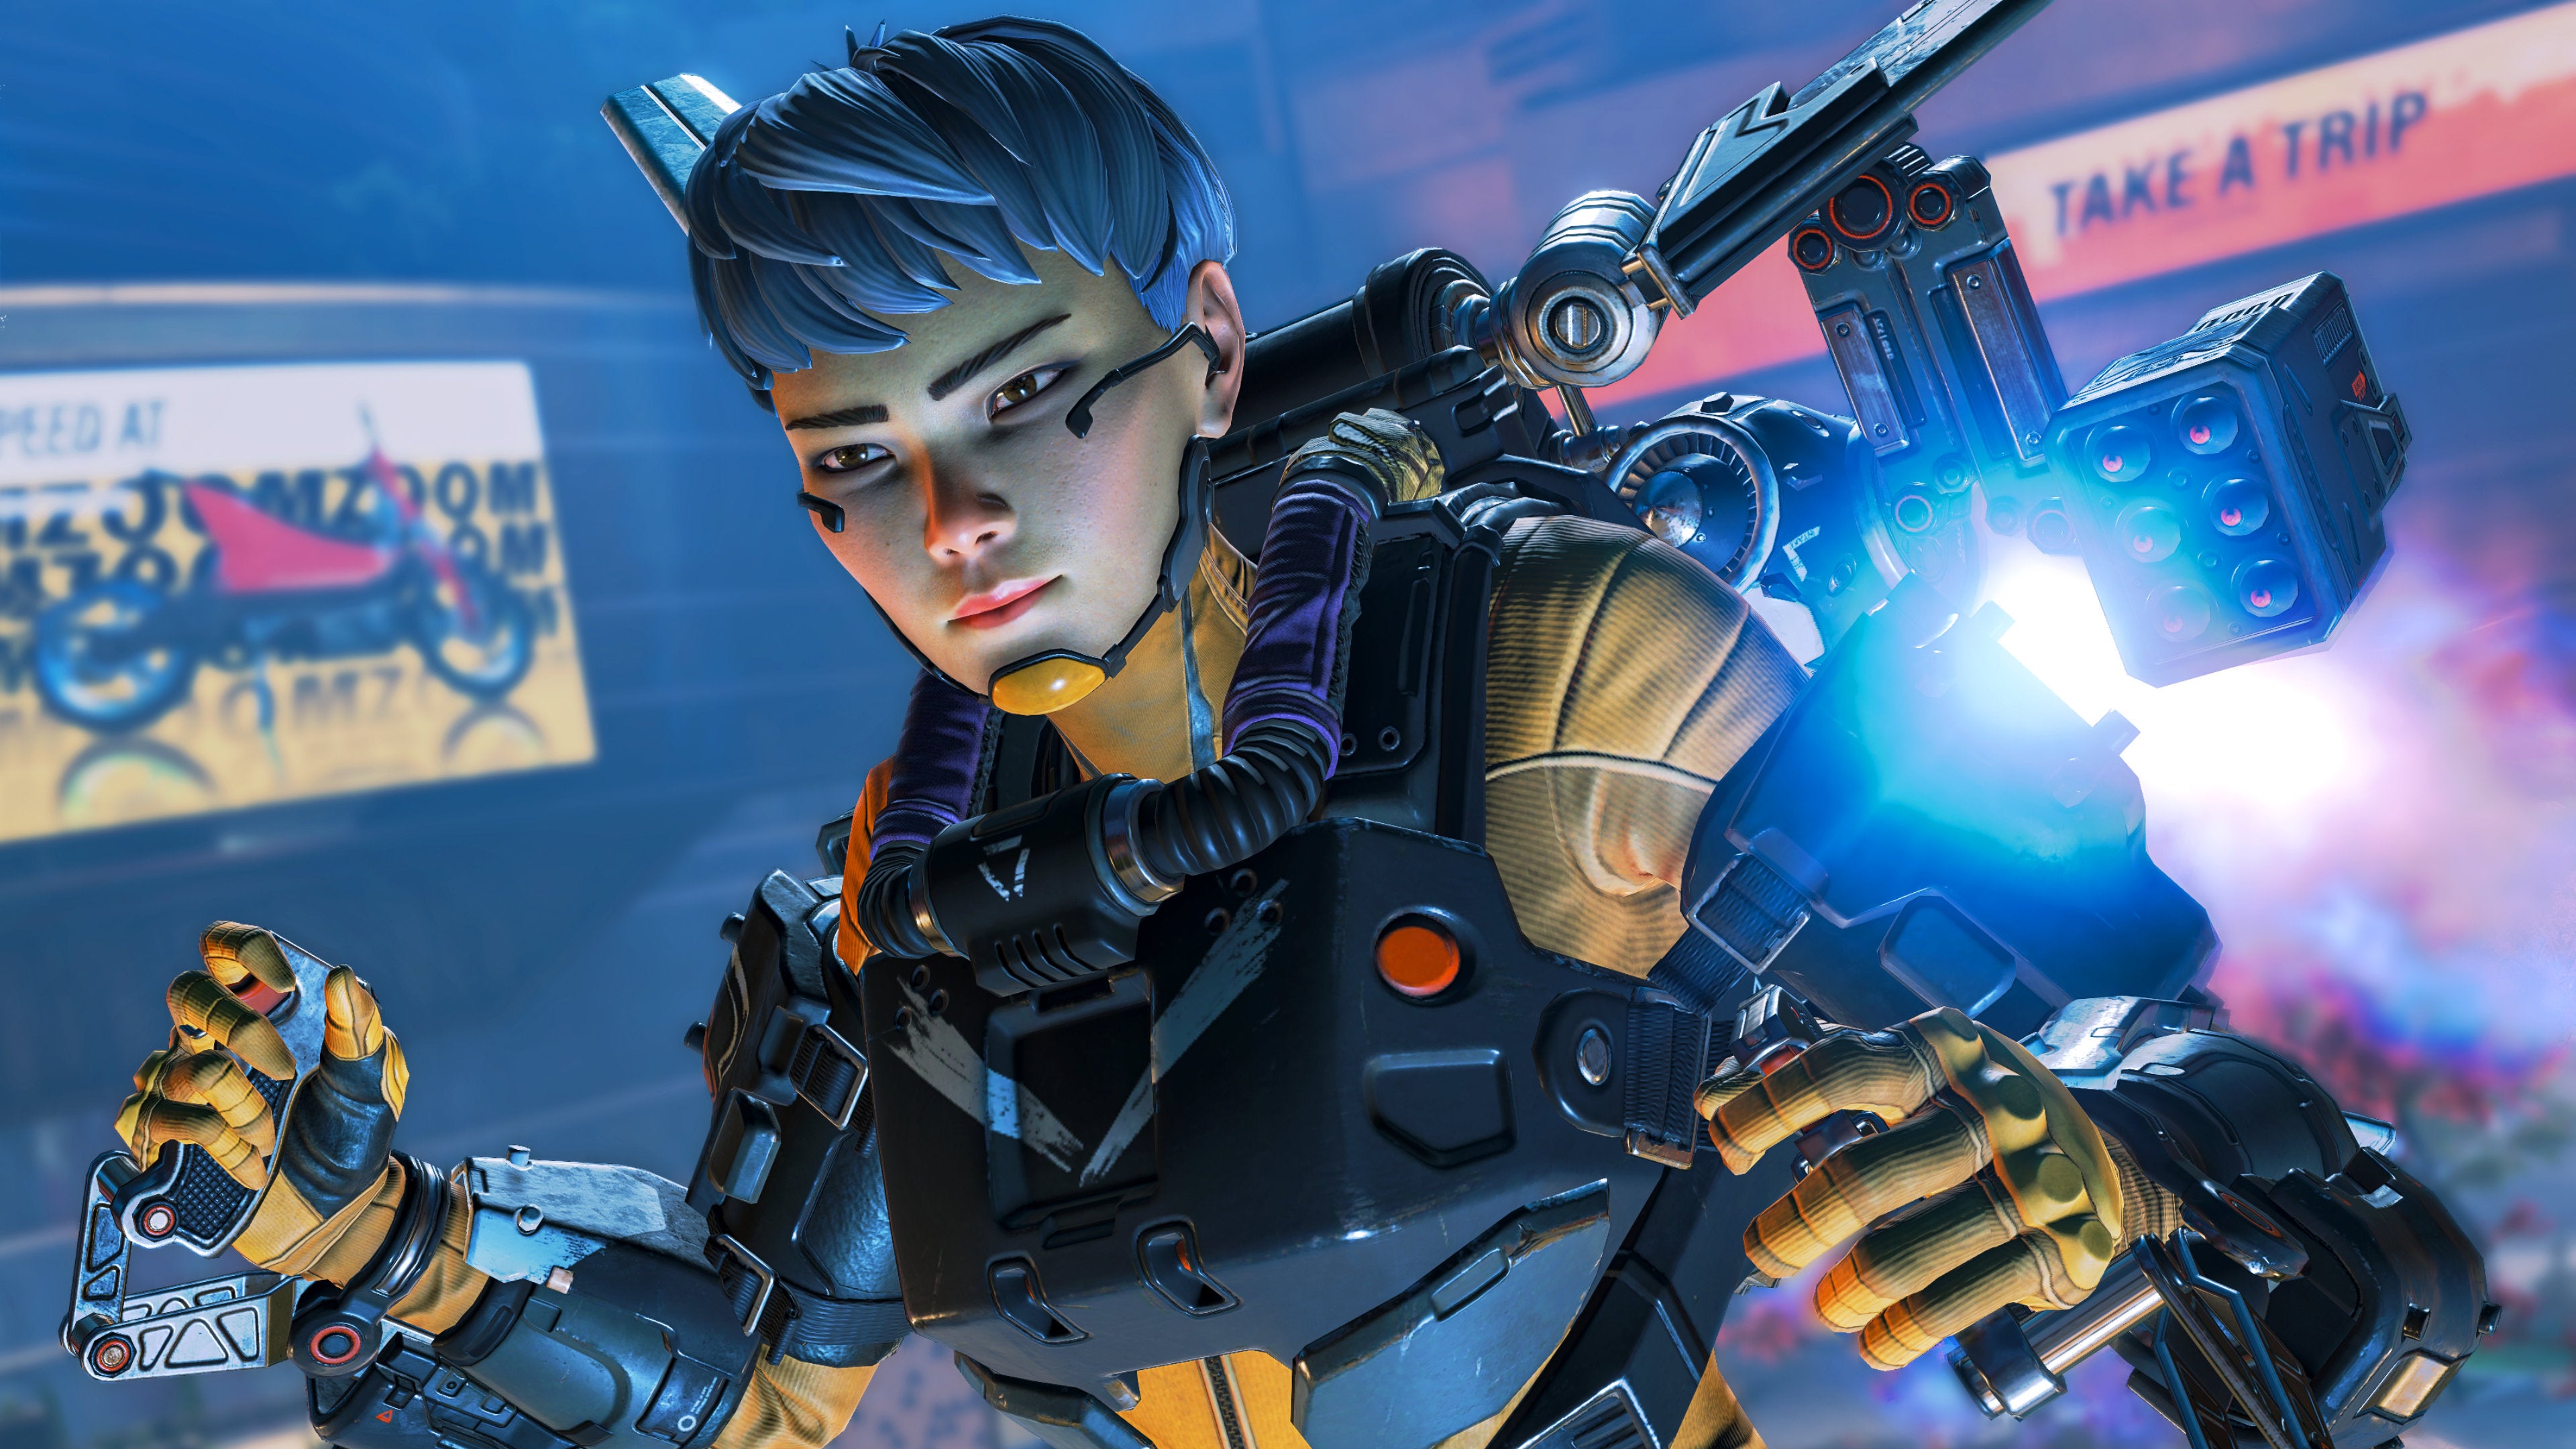 Promotional Apex Legends screenshot of Valkyrie hovering in the air with her jetpack.